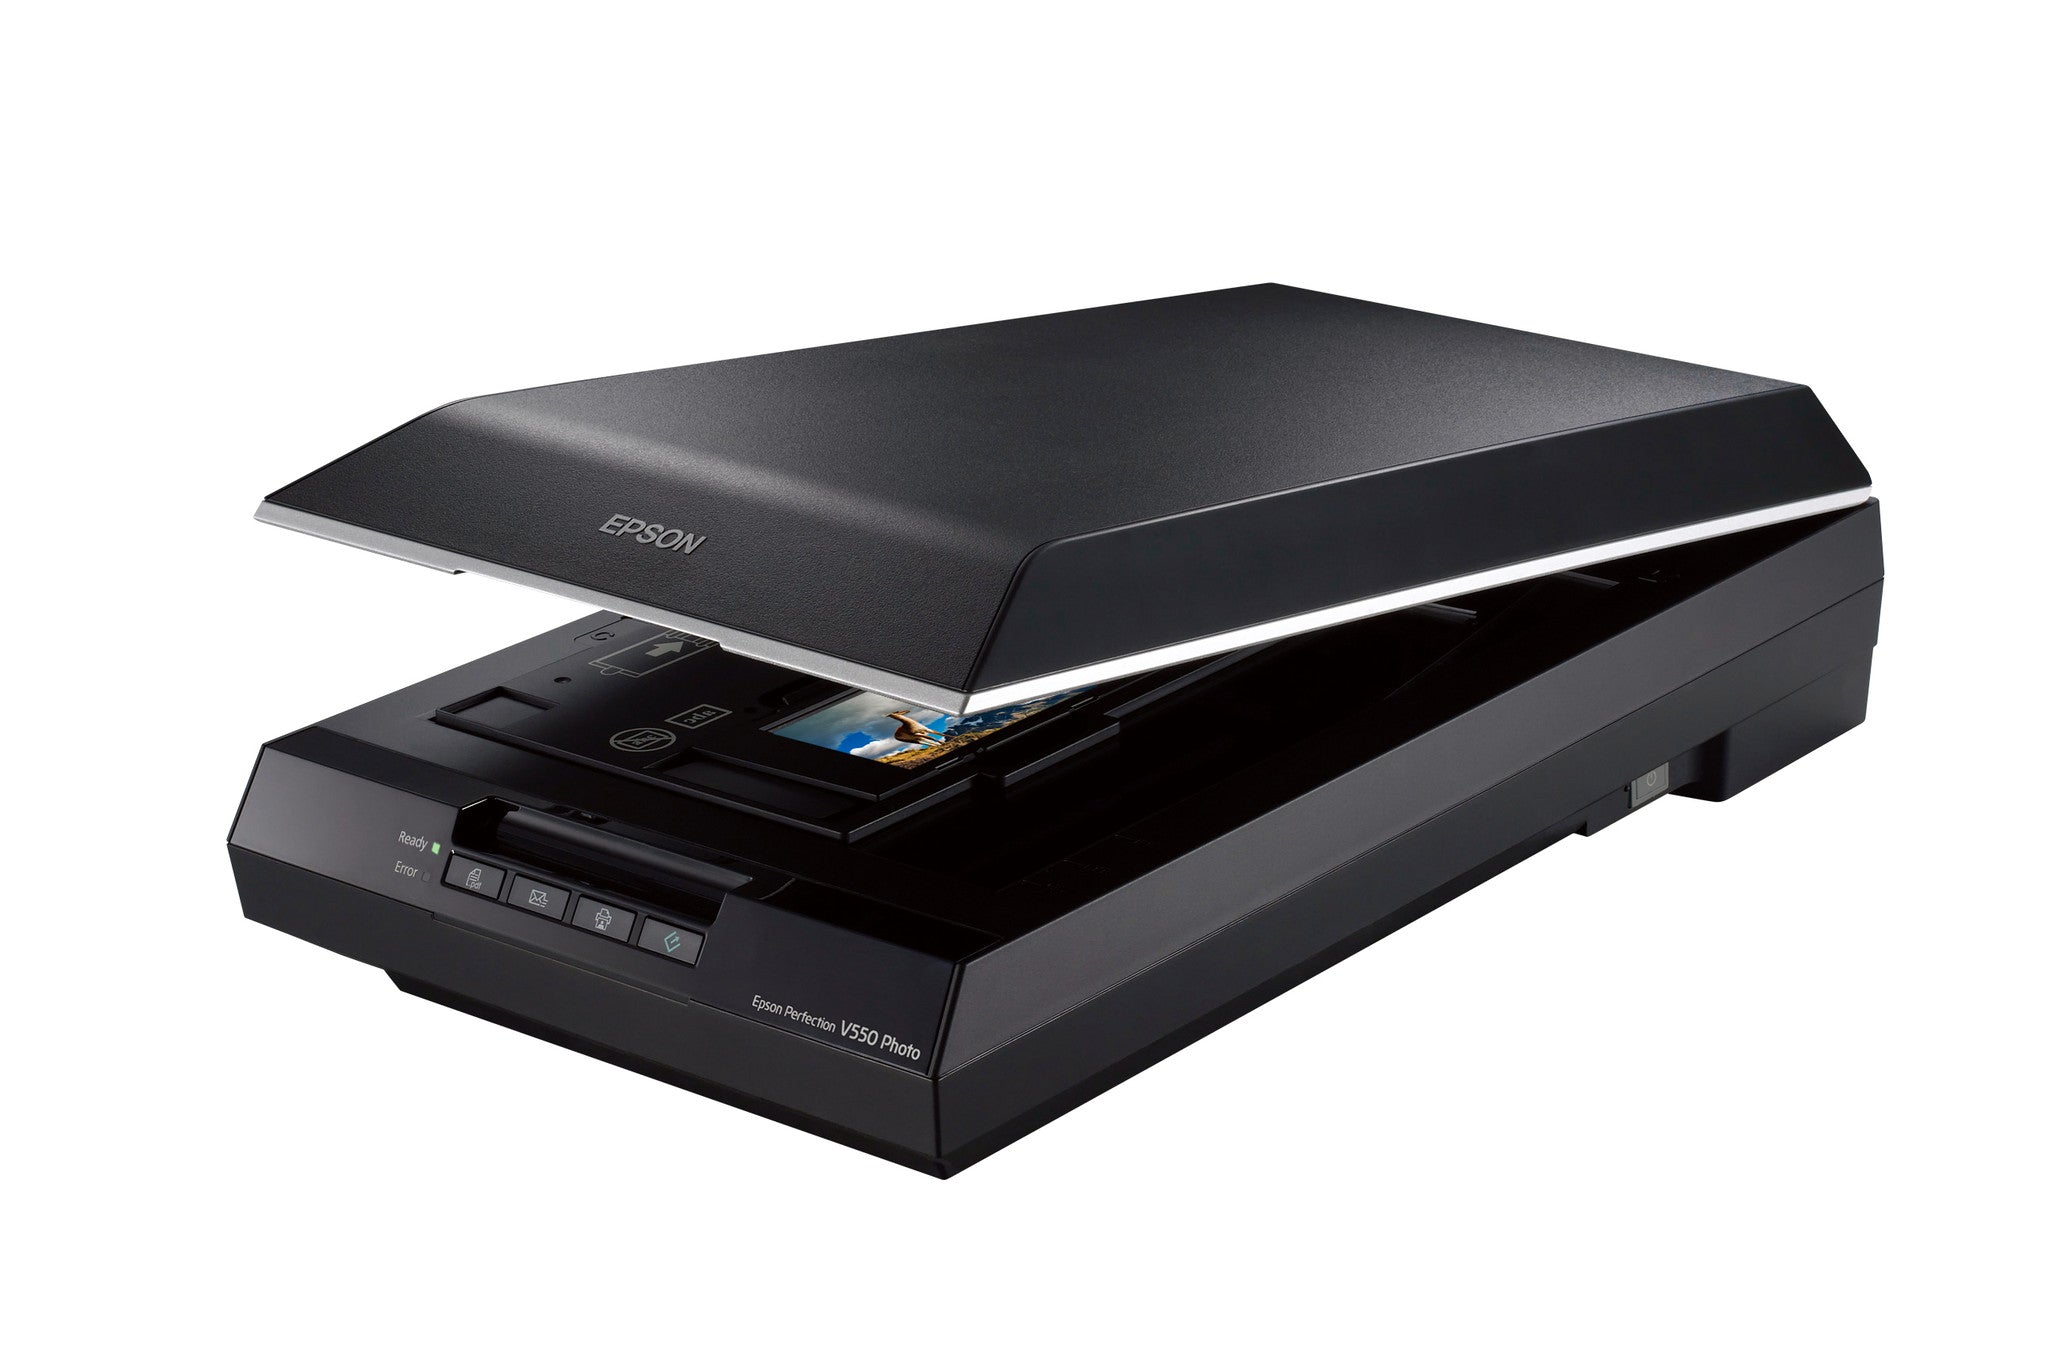 Epson V550 Perfection Photo Scanner, computers flatbed scanners, Epson - Pictureline  - 4